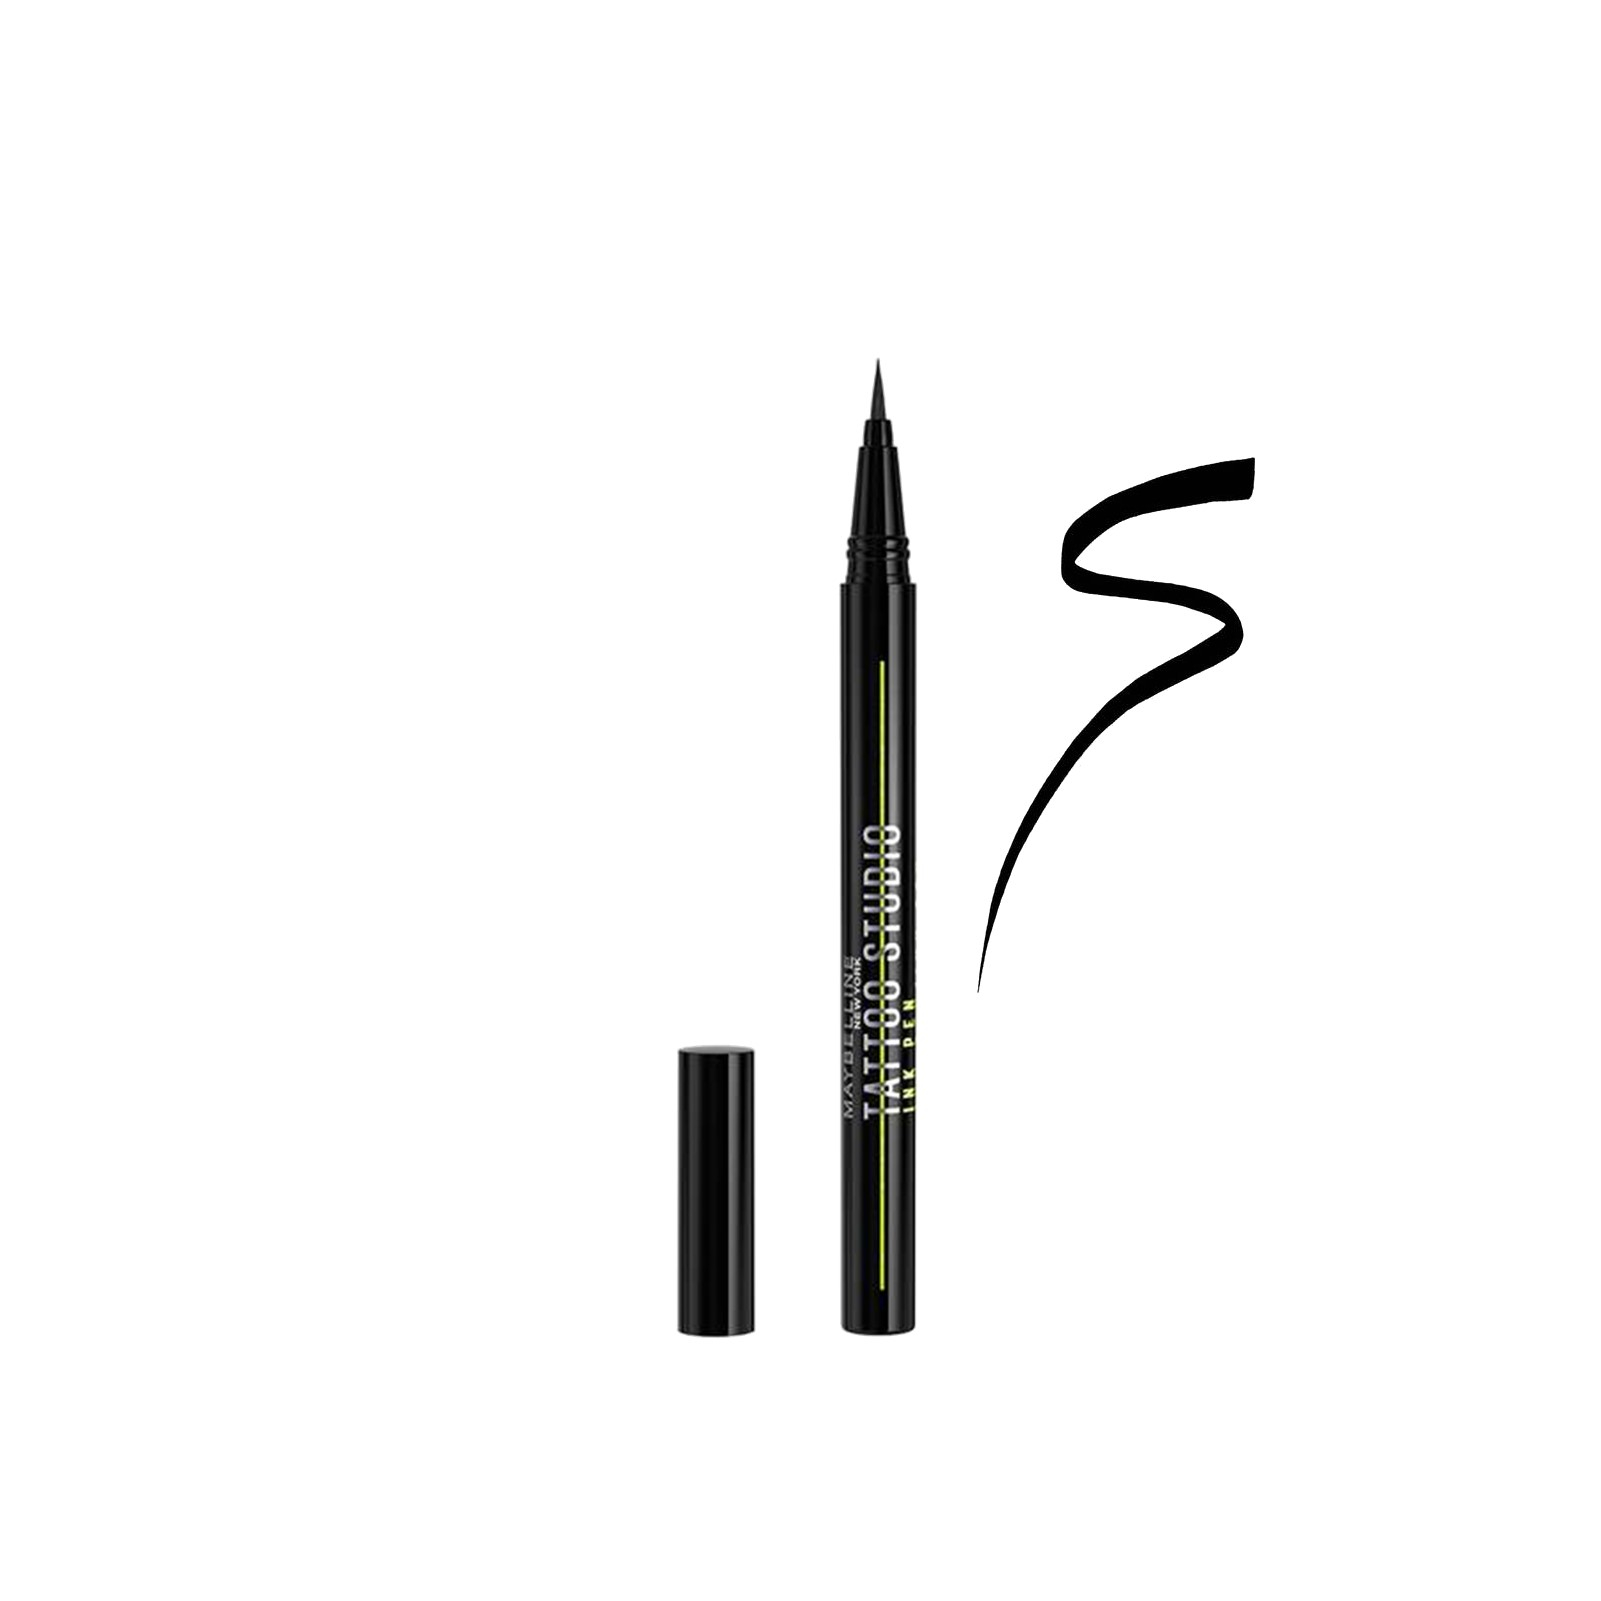 MAYBELLINE NEW YORK  TATTOO EYELINER PENCIL  AVAILABLE IN 8 COLOURS   Beauty Bar